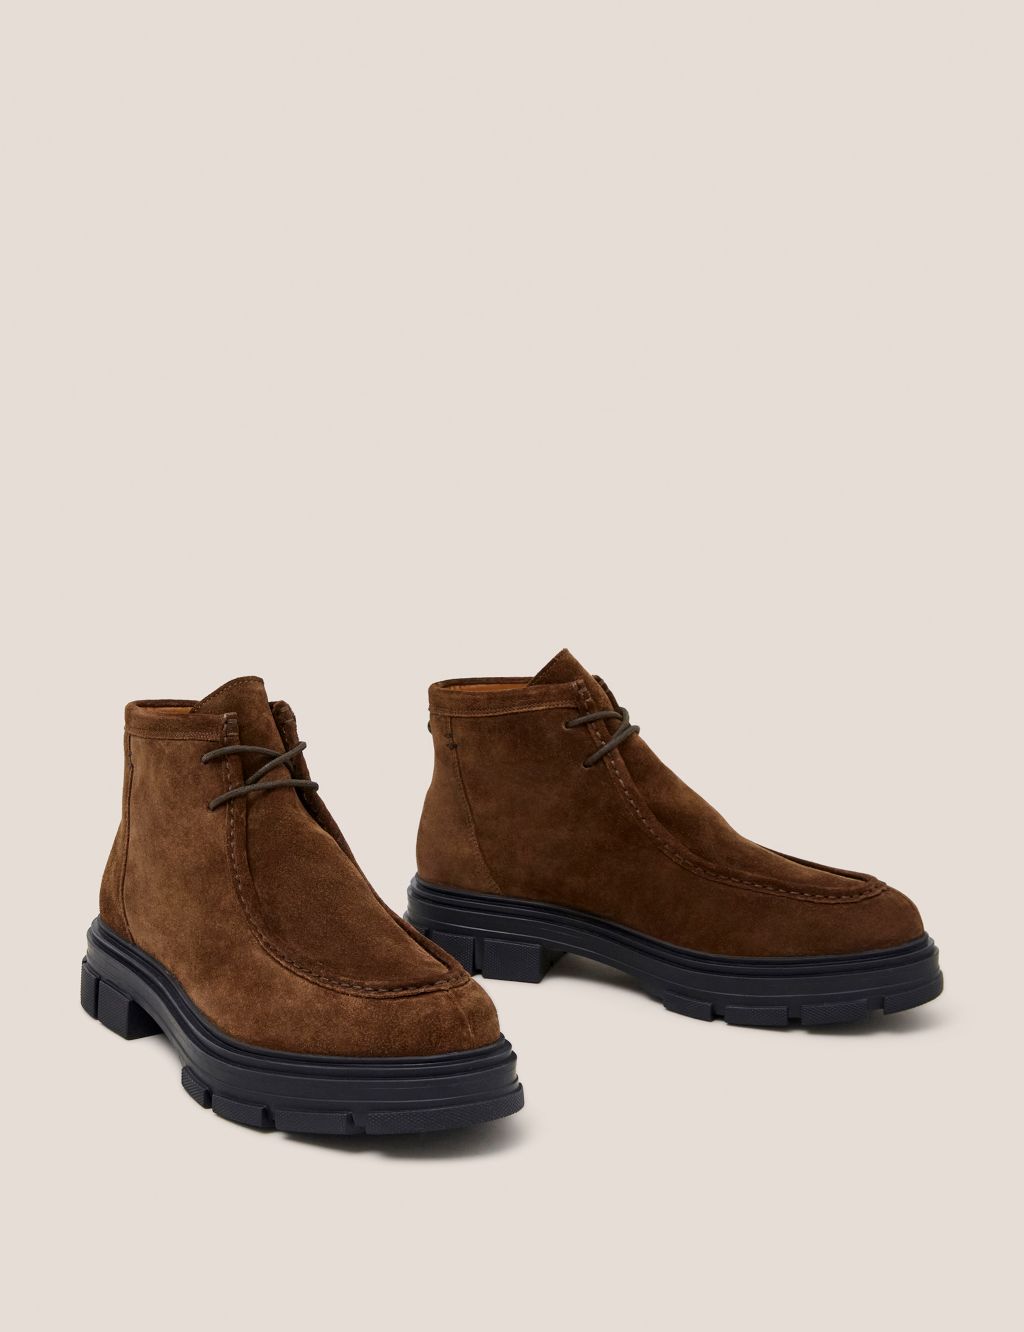 Suede Desert Boots image 5